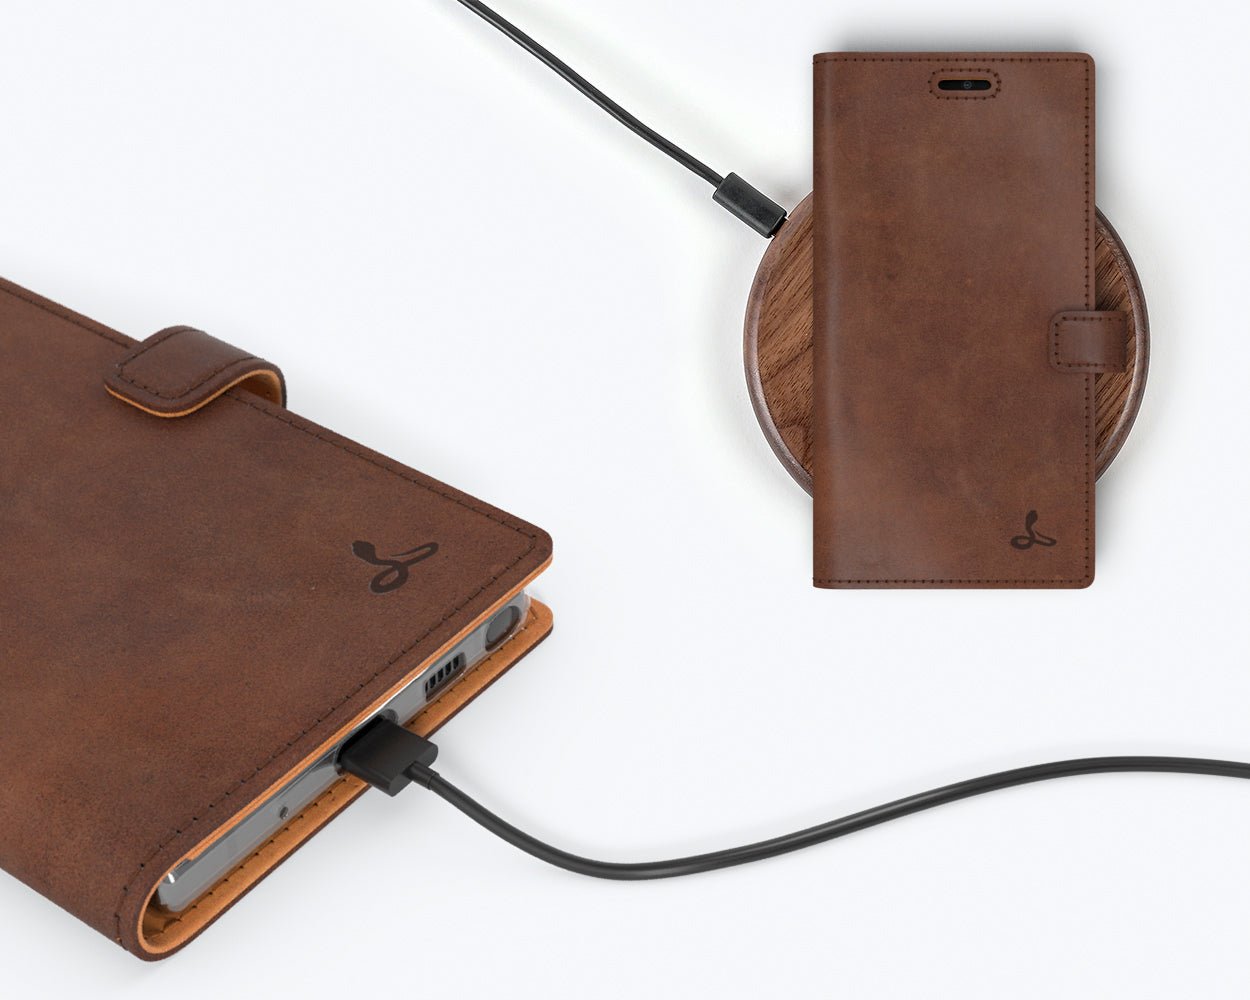 Samsung Galaxy Note 10 - Vintage Leather Wallet (Almost Perfect) Plum Samsung Galaxy Note 10 - Snakehive UK